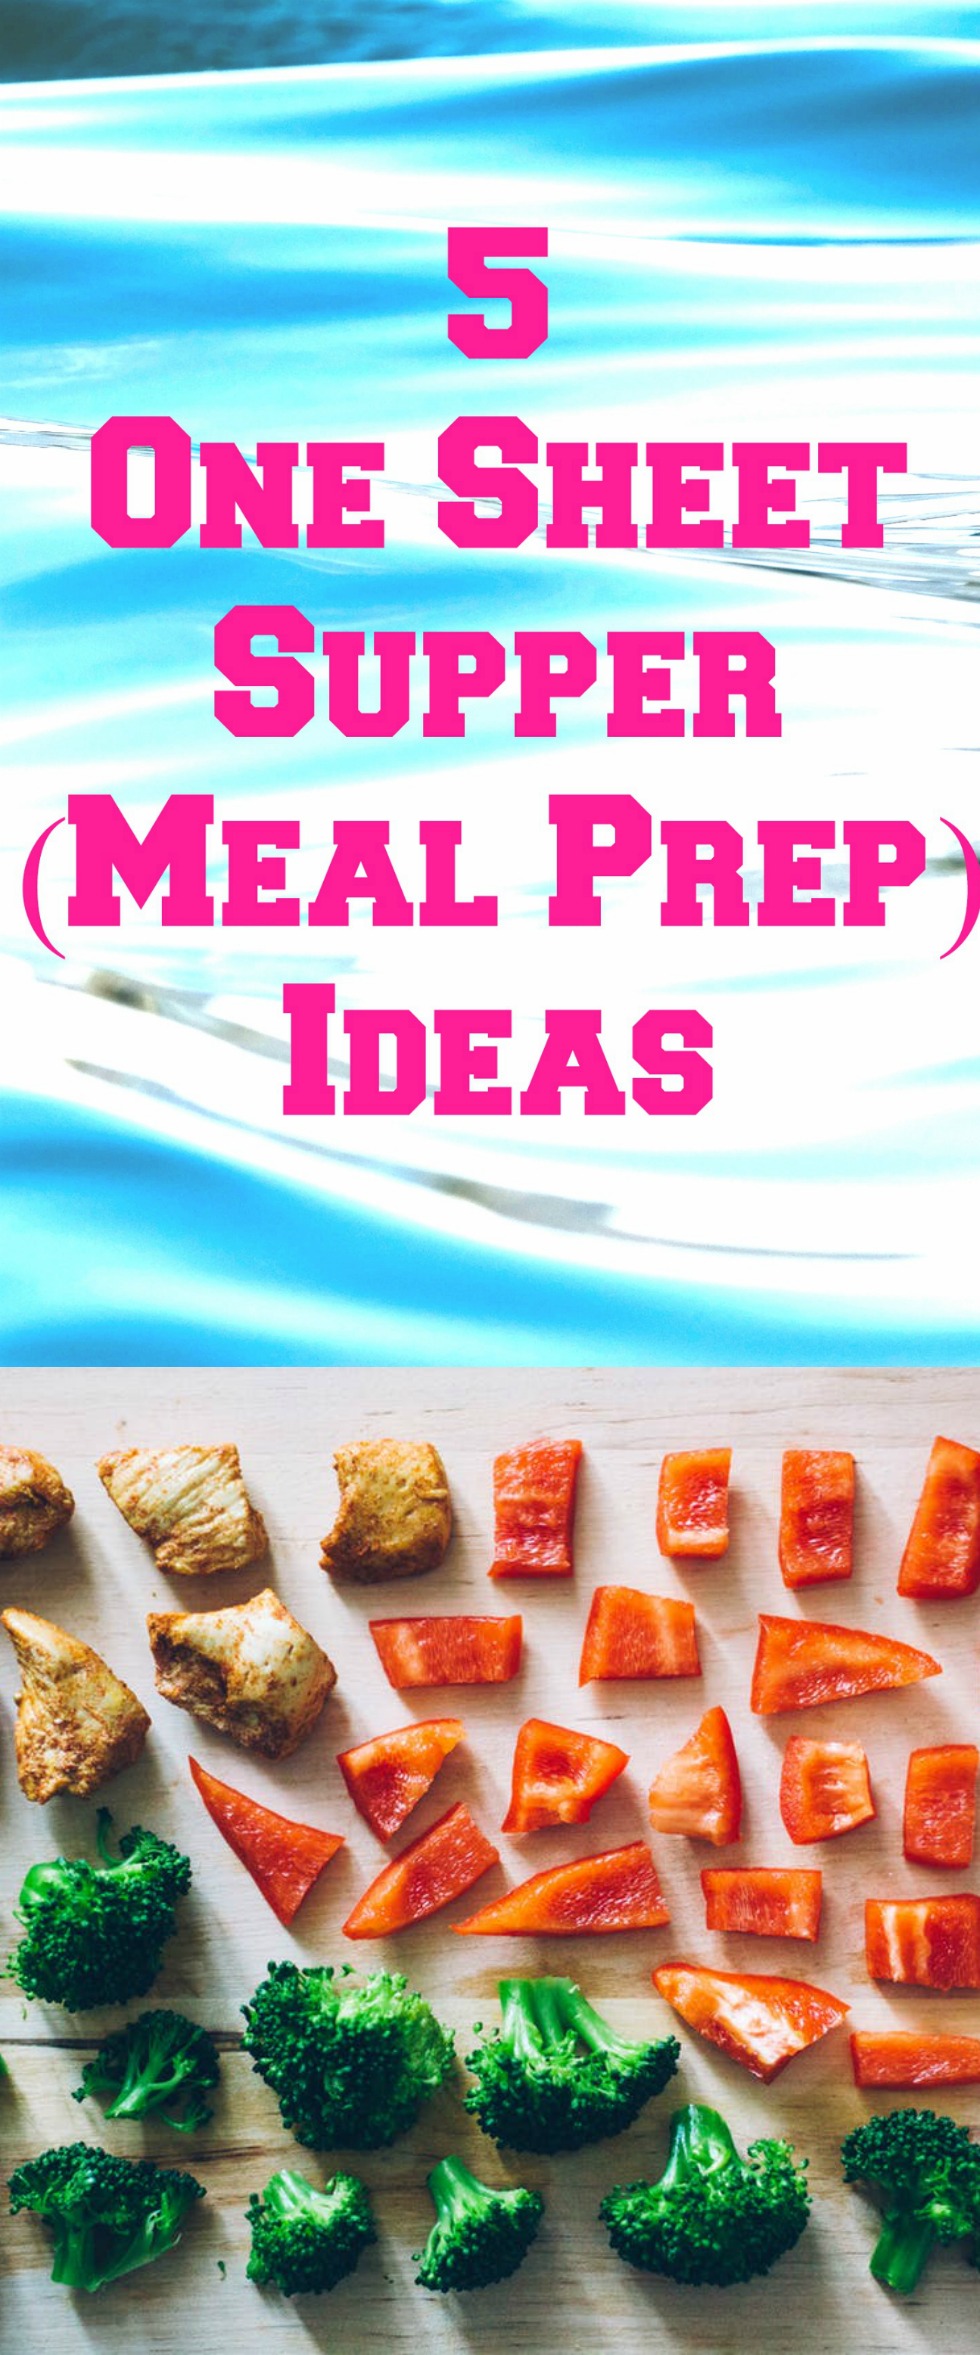 You're going to LOVE Meal Prep made easy with 5 sheet pan suppers. Easily place all your healthy ingredients on one sheet pan and bake. Once done place in individual containers which are prepared for lunch.